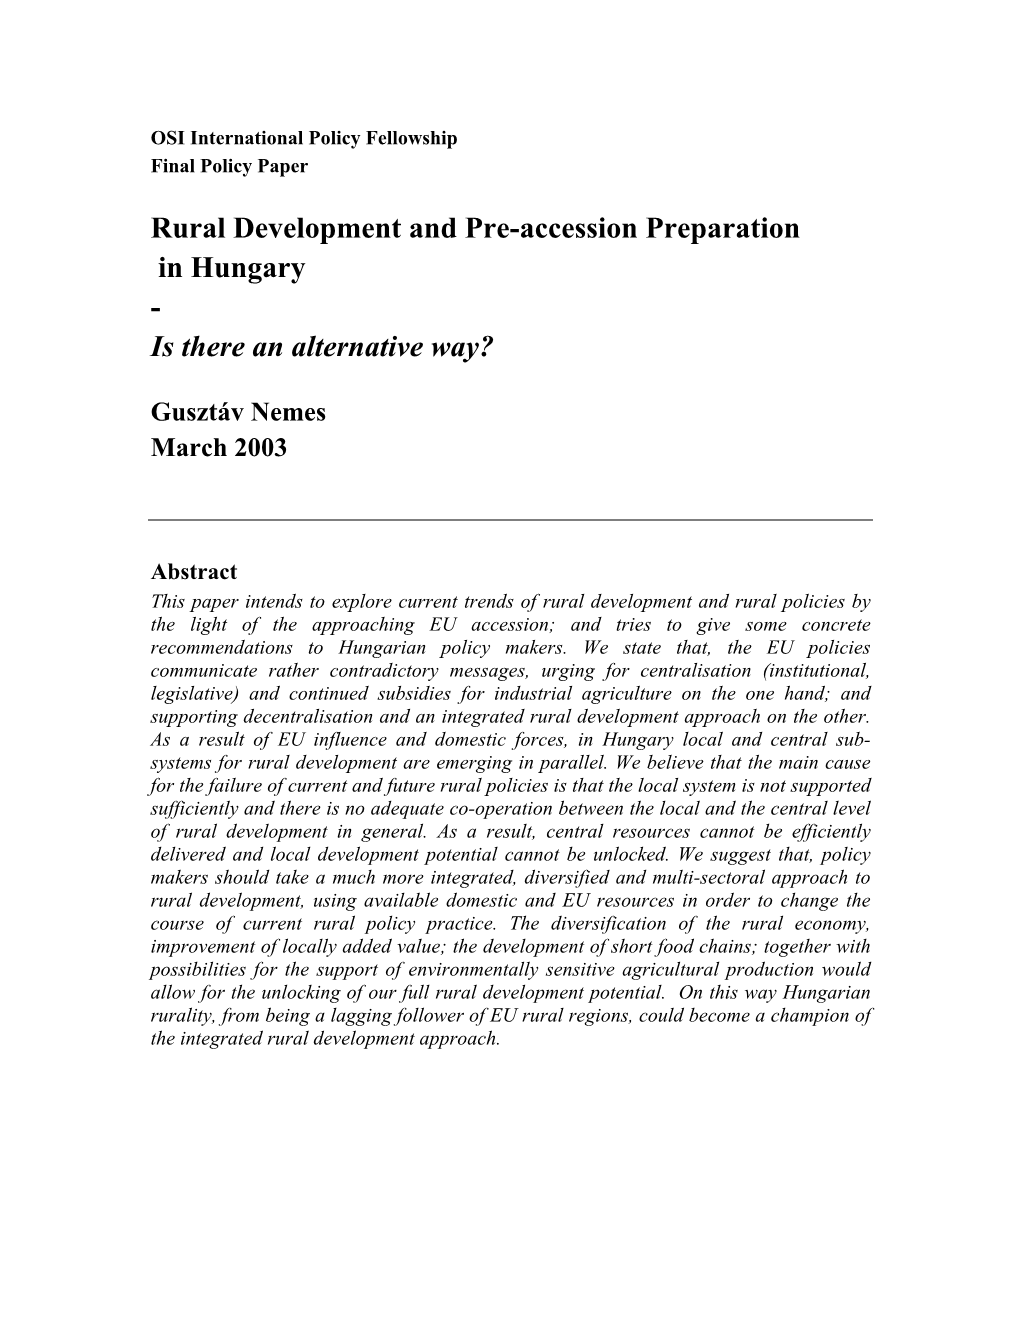 Rural Development and Pre-Accession Preparation in Hungary - Is There an Alternative Way?